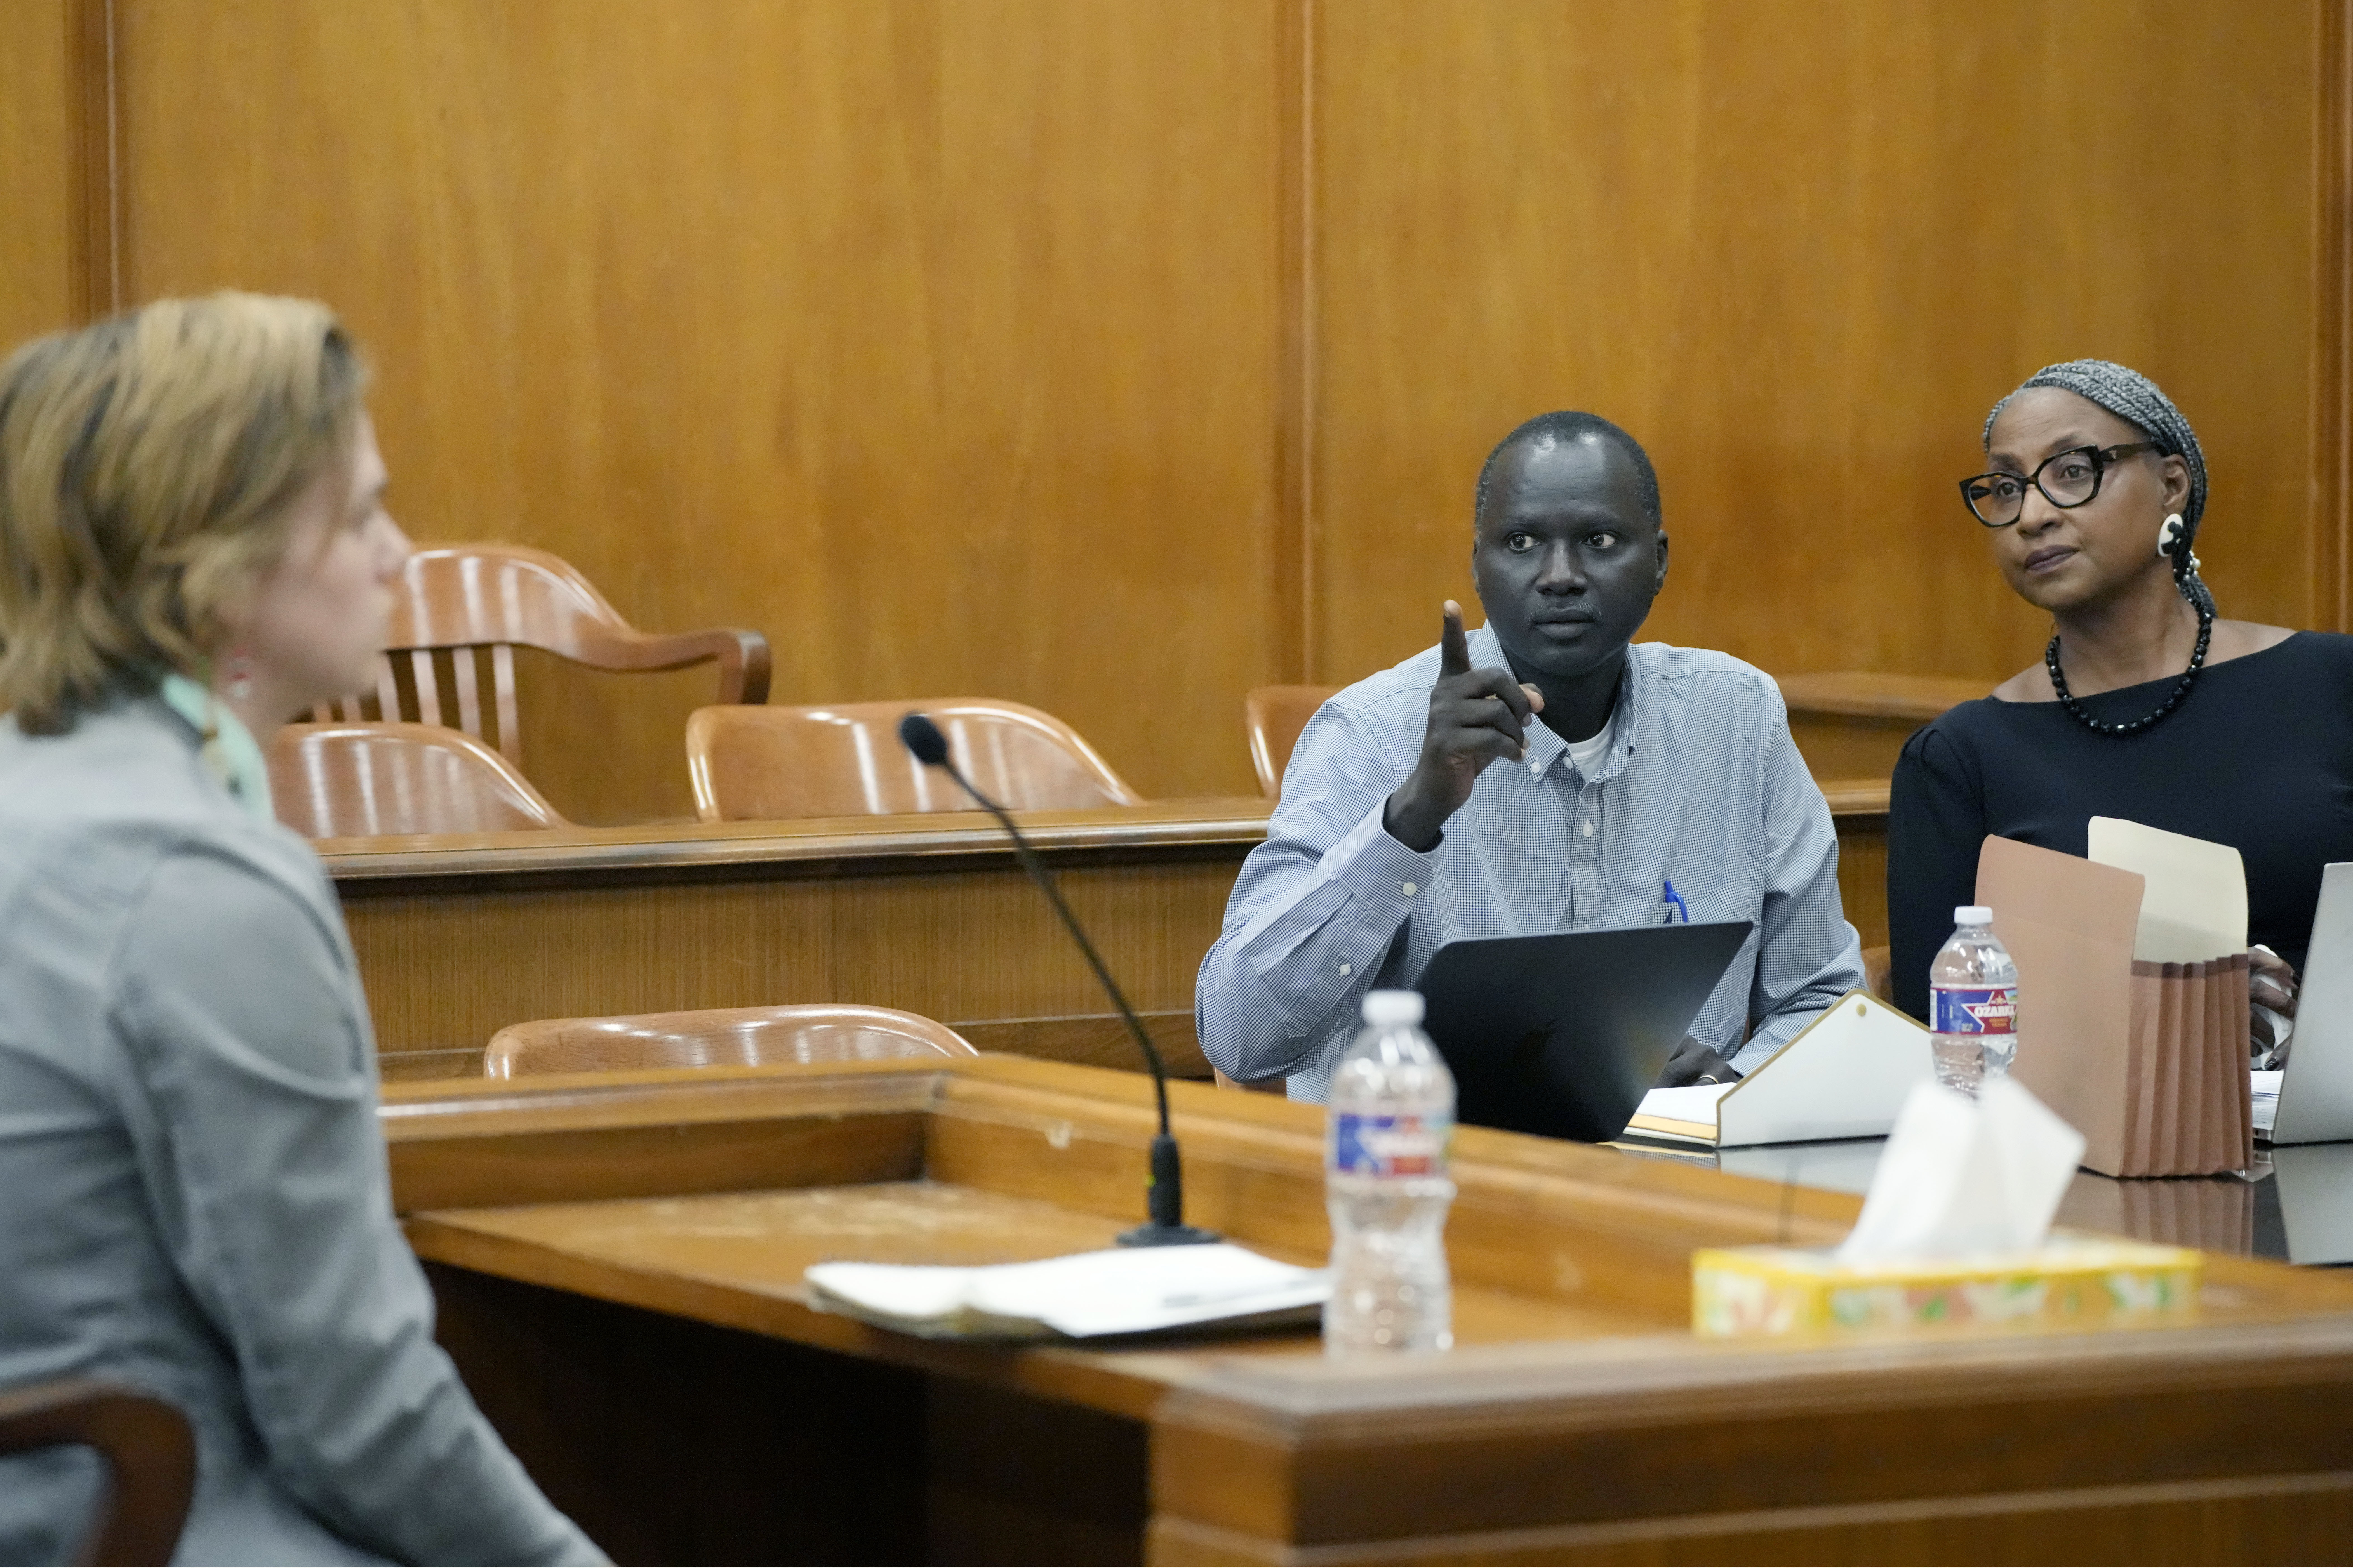 Lisa Ross, right, attorney for Bul Mabil, seated center, brother of Dau Mabil, a 33-year-old Jackson, Mississippi, resident who went missing on March 25 and whose body was found in April floating in the Pearl River in Lawrence County, listens to his question, while Karissa Bowley, wife of the deceased, awaits a renewed spate of questions during a hearing, on whether a judge should dissolve or modify his injunction preventing the release of Mabil's remains until an independent autopsy could be conducted, Tuesday, April 30, 2024, in Jackson. Photo credit: Rogelio V. Solis, The Associated Press